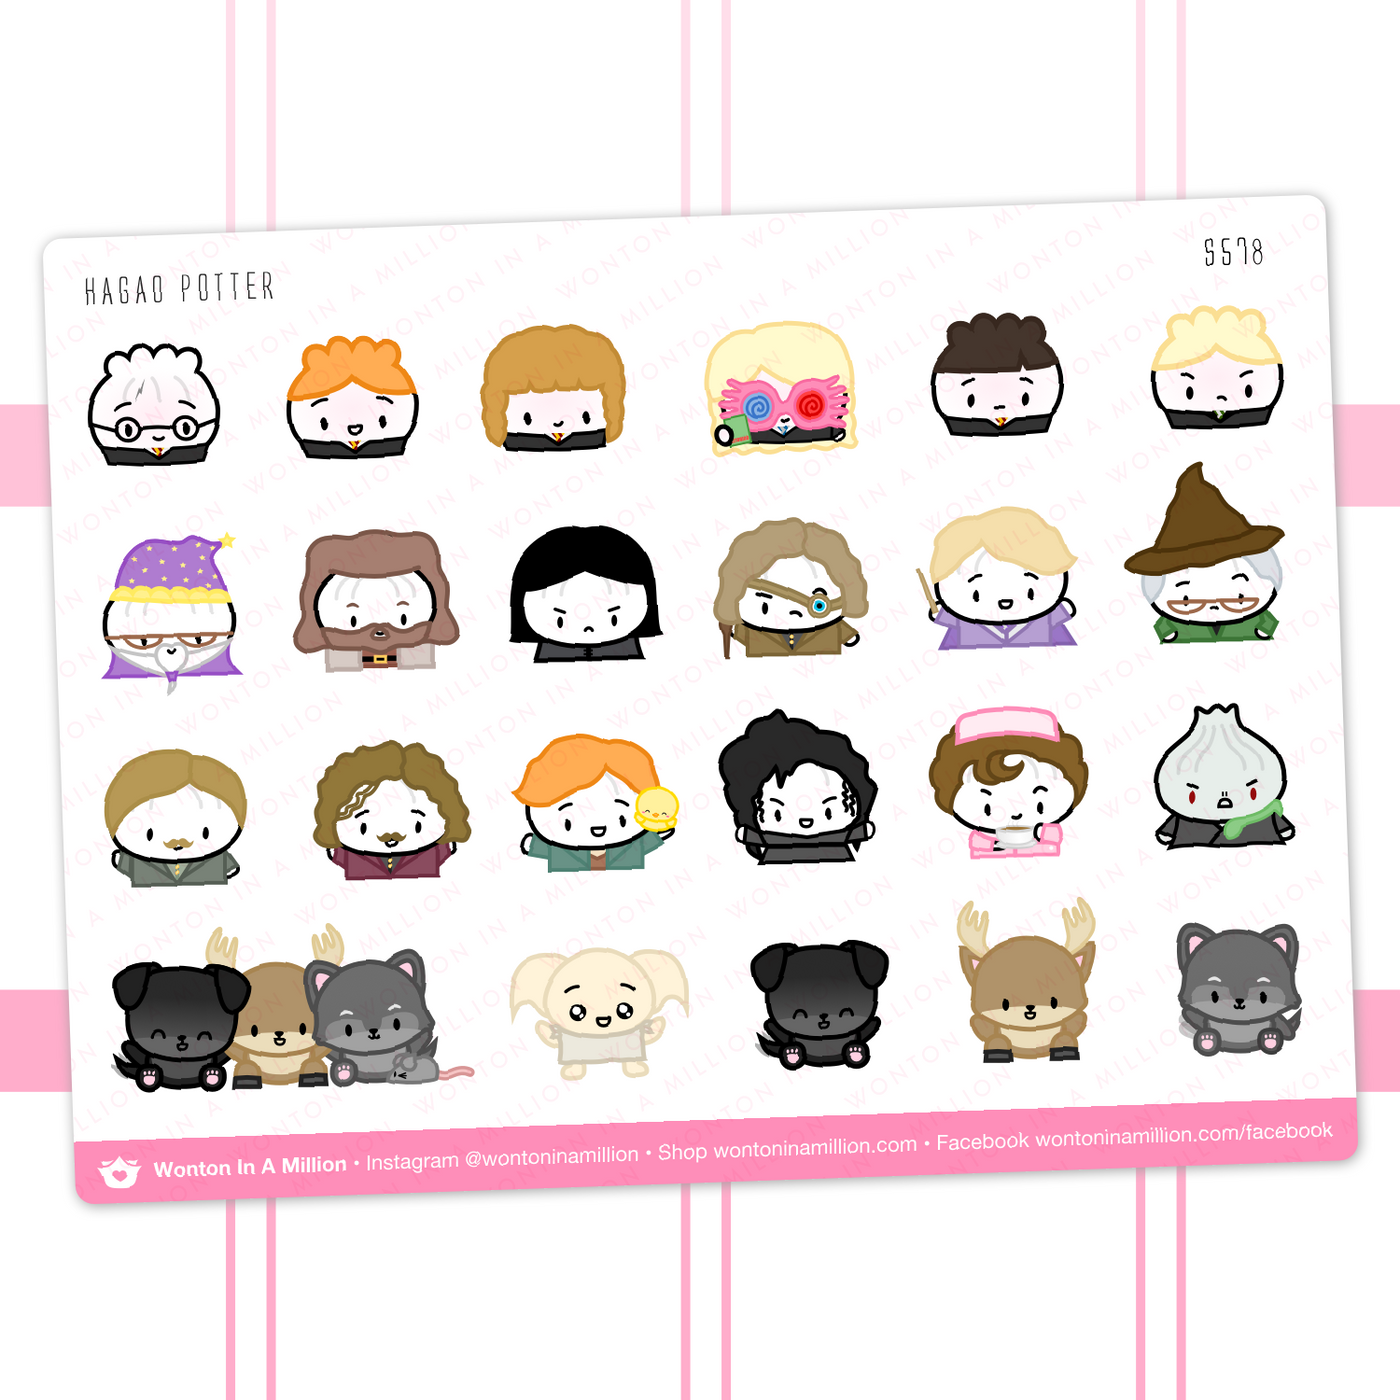 S578 | Hagao Potter - All The Characters Stickers